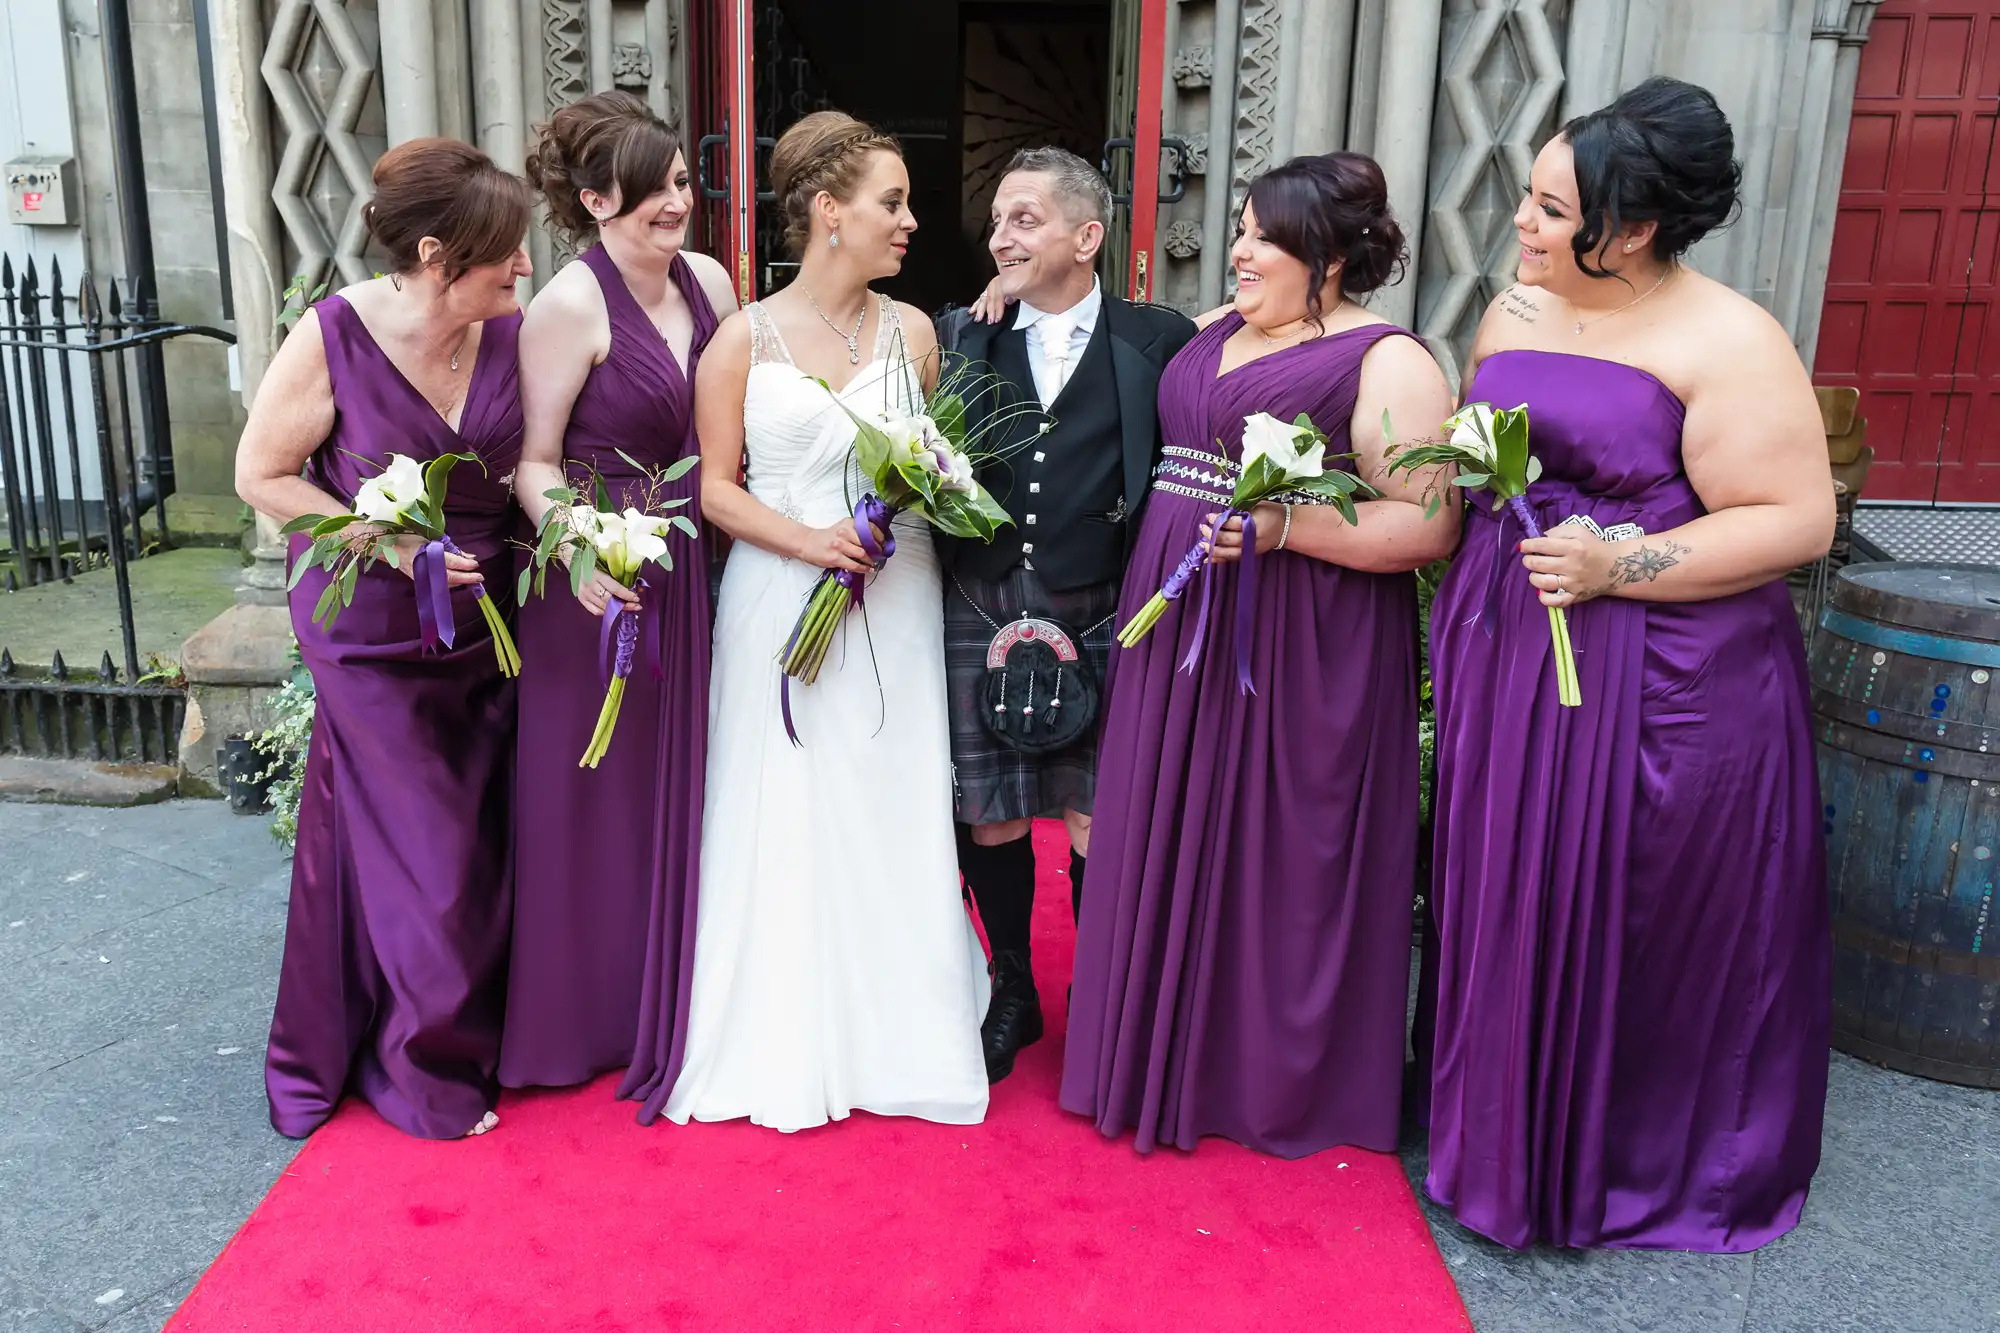 A bride and groom smiling and interacting joyfully with four bridesmaids in purple dresses, holding bouquets, on a red carpet outside a building.